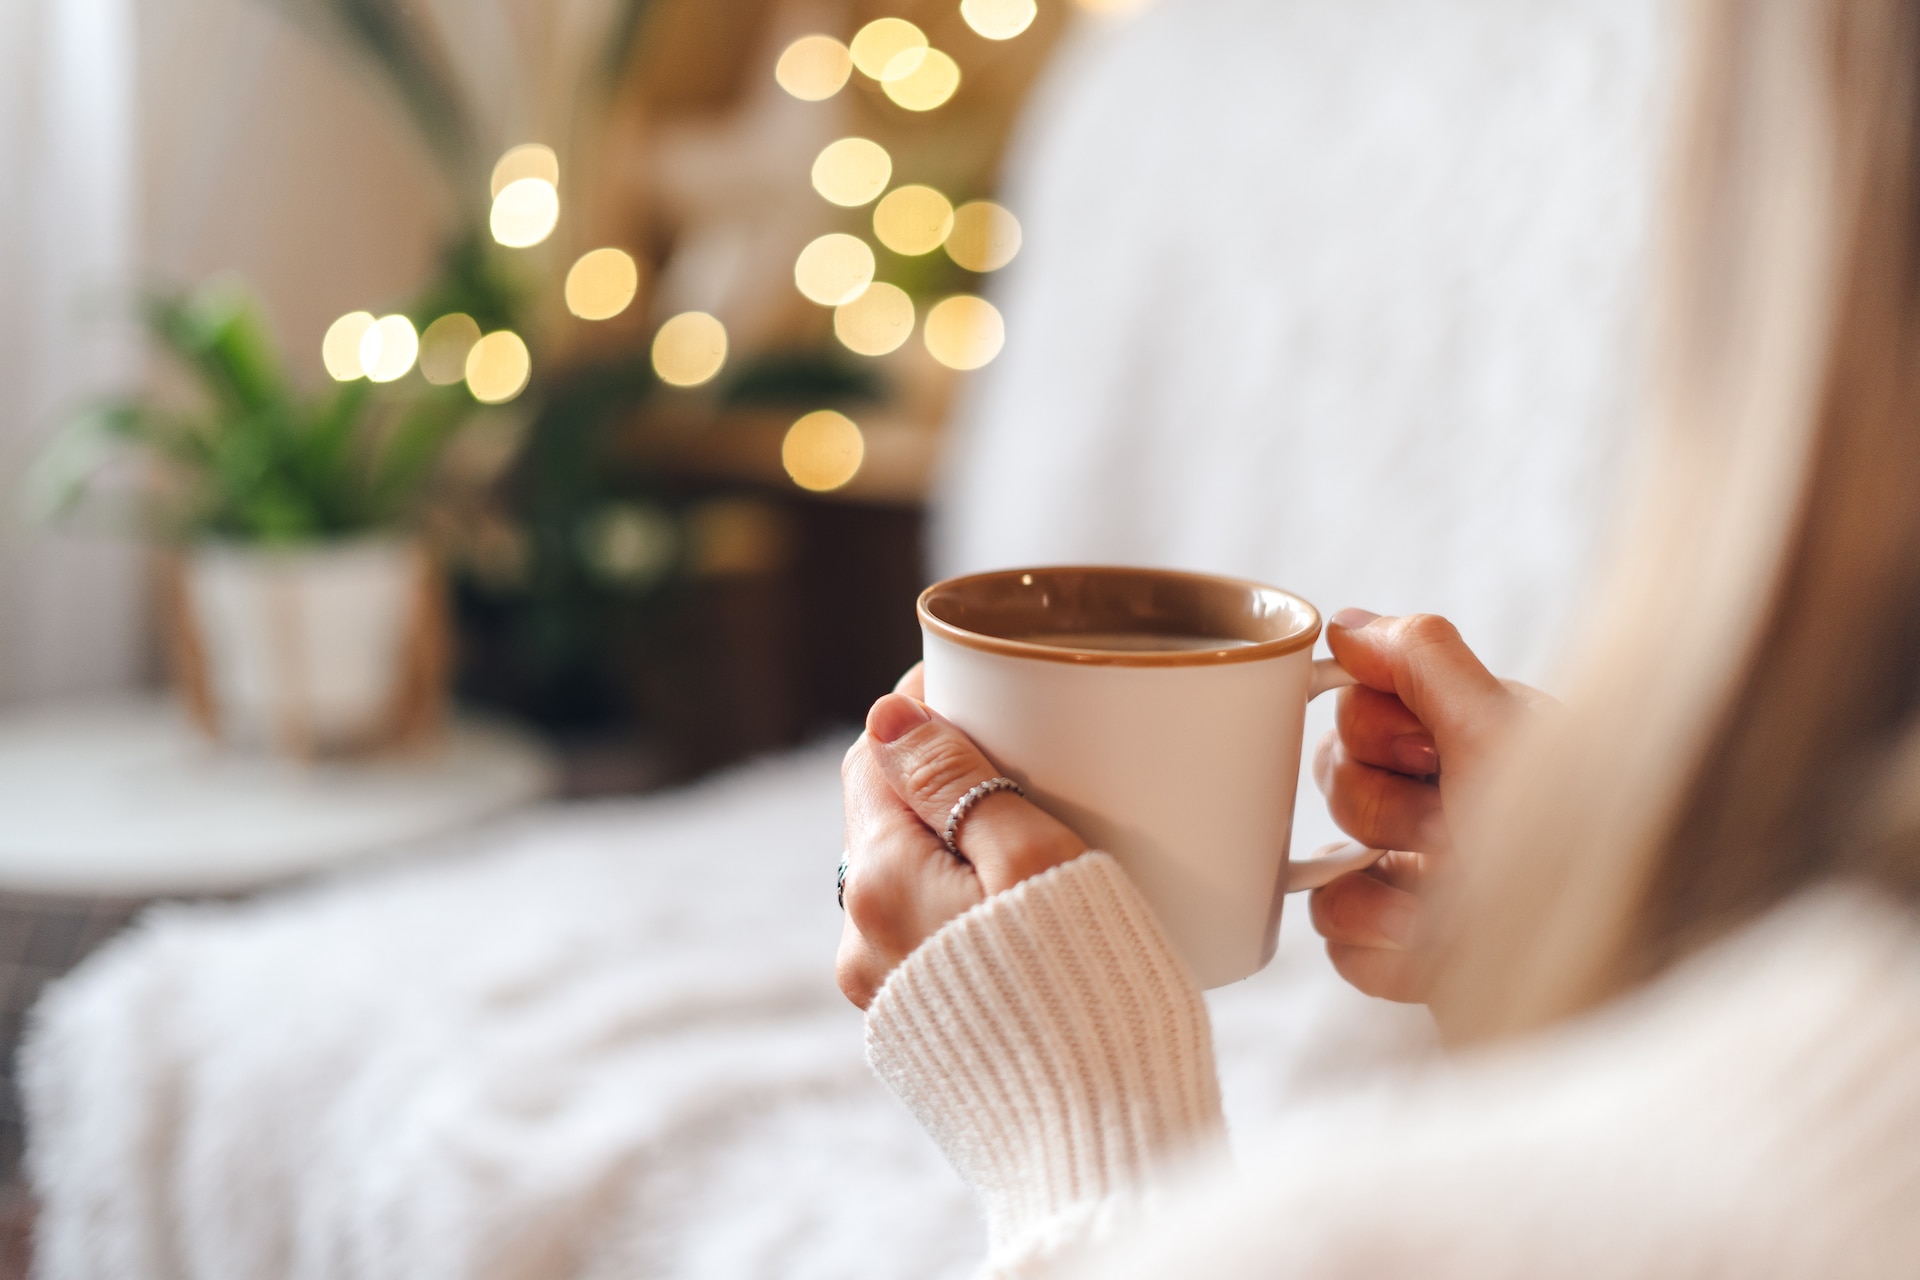 Woman's hands in sweater holding cup of hot drink coffee indoors.